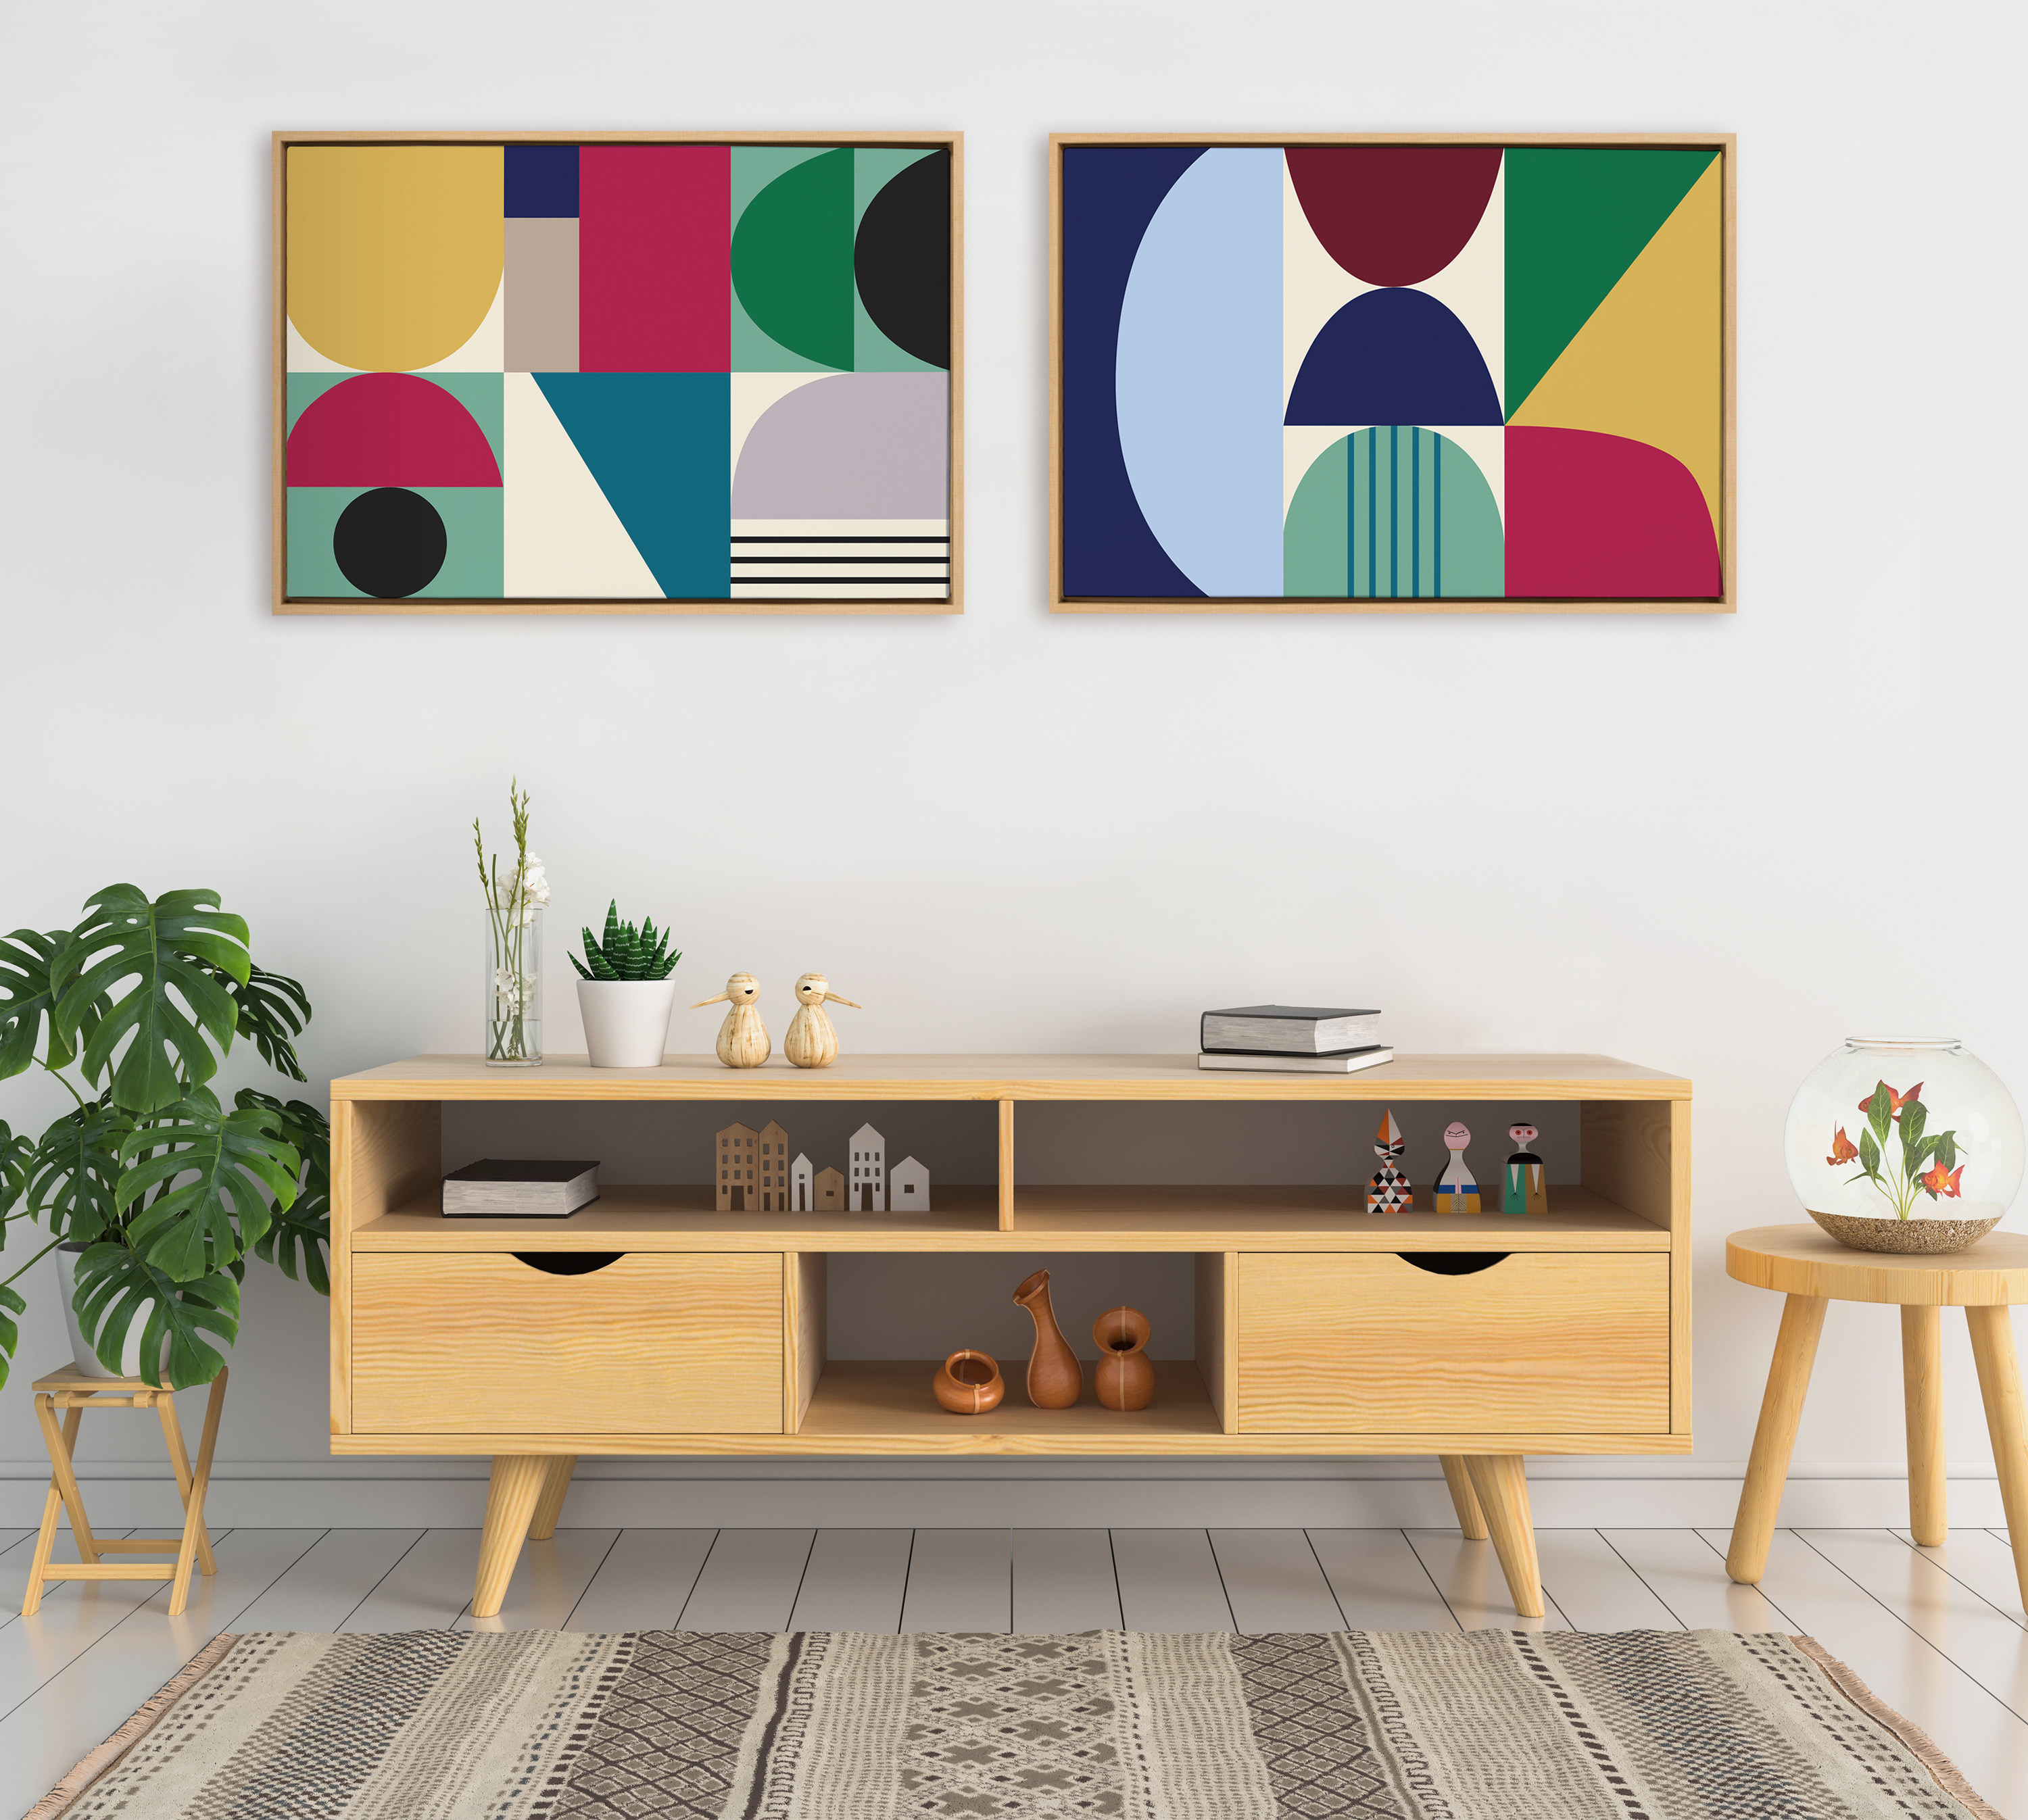 Kate and Laurel Sylvie MCM Pattern 10 and 11 Framed Canvas Wall Art Set by Rachel  Lee of My Dream Wall, Piece 23x33 Natural, Vibrant Colorful Modern  Abstract Wall Décor